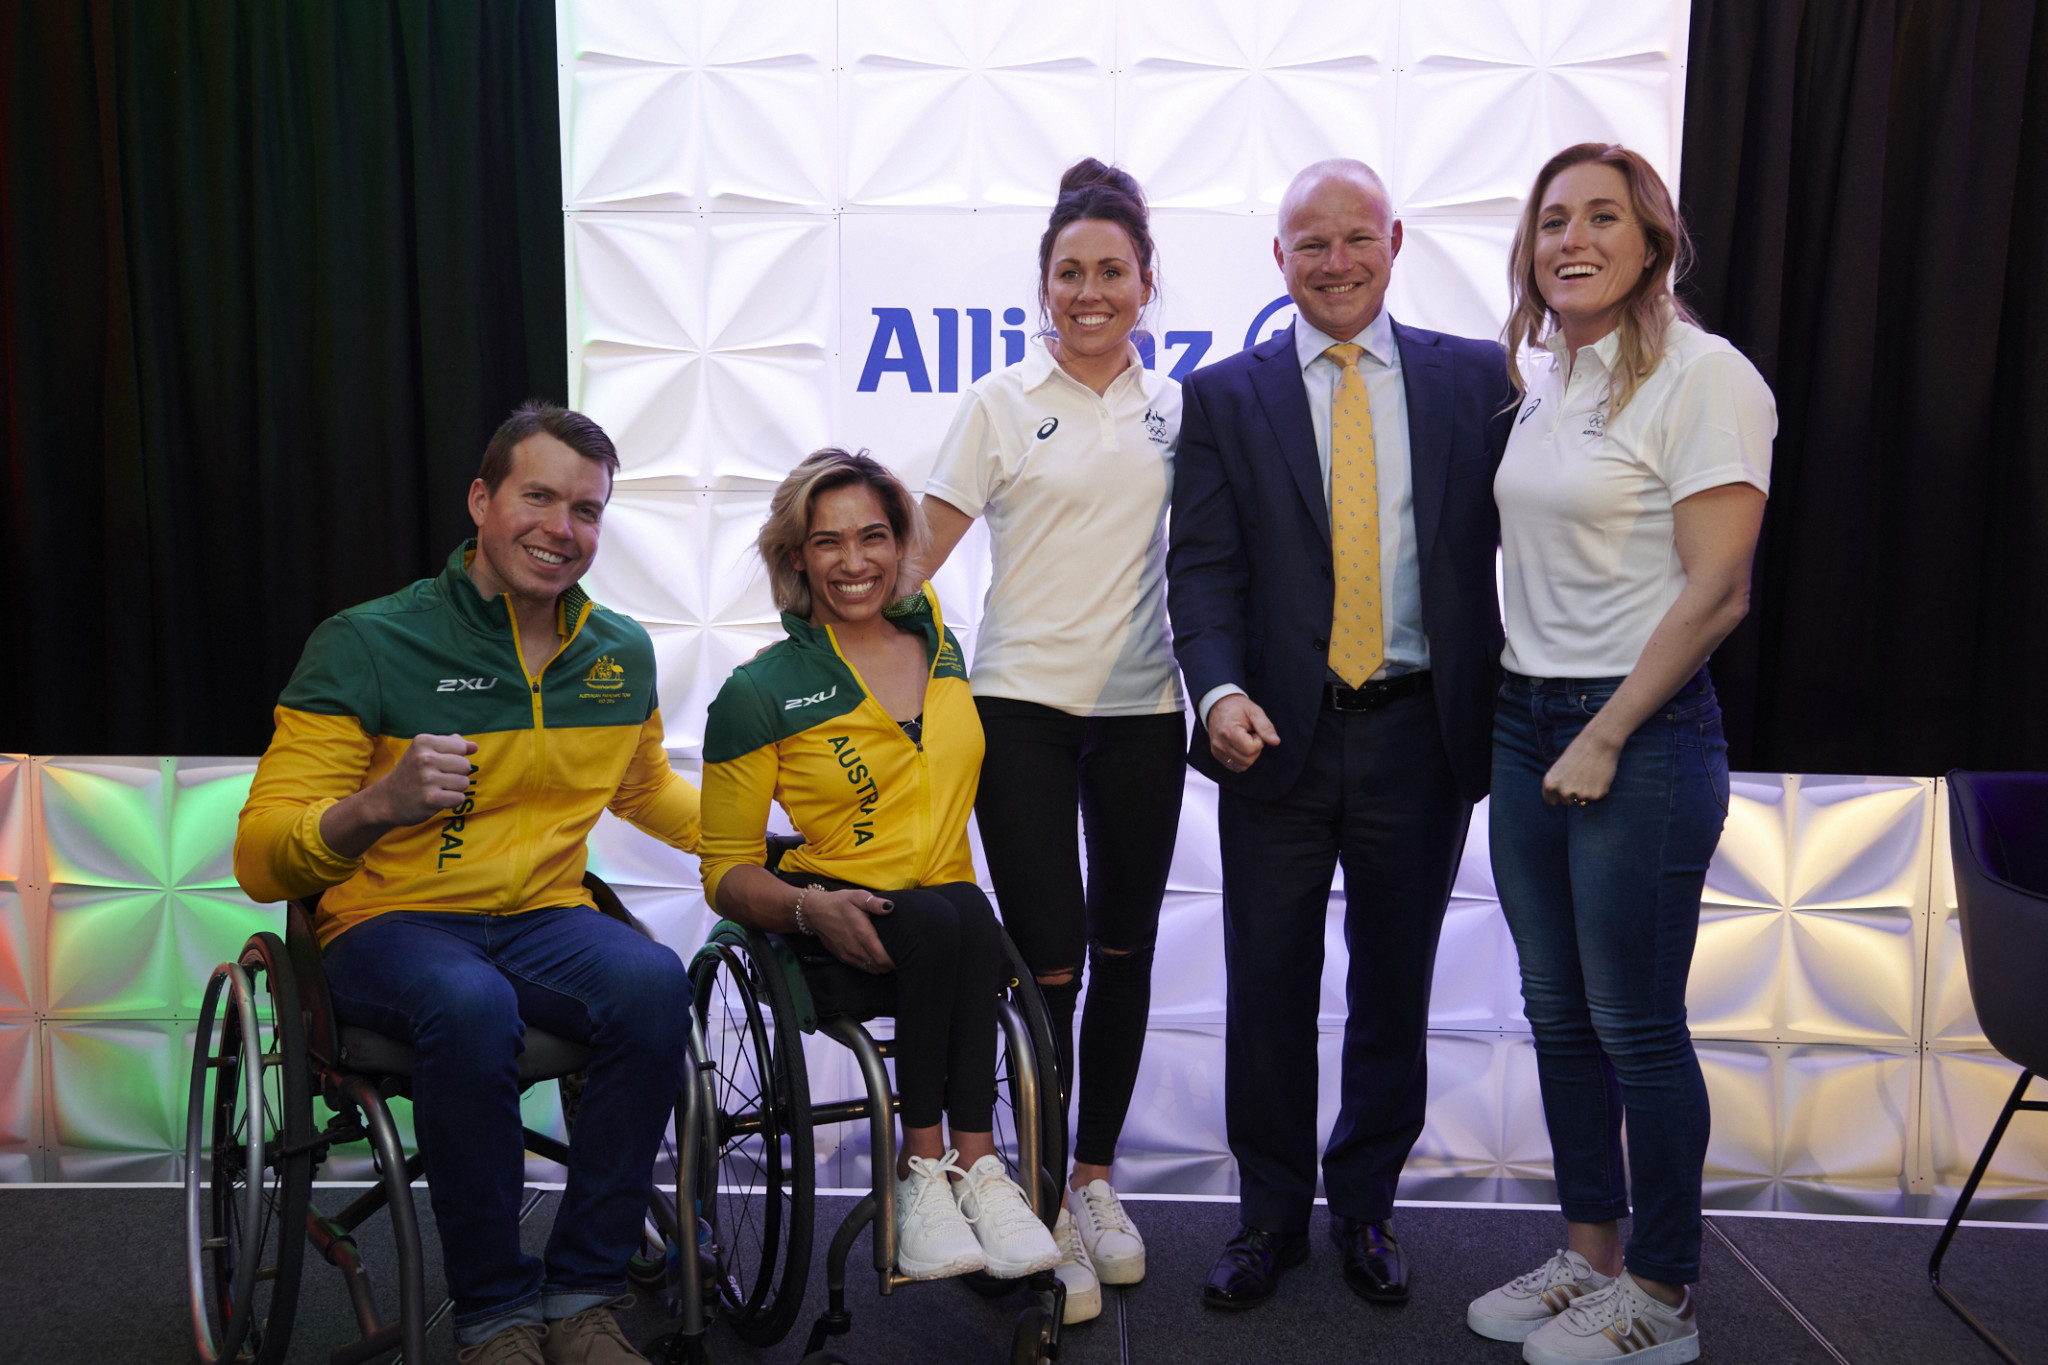 Australia Olympic and Paralympic team hold "One Year to Tokyo" events with sponsors Allianz